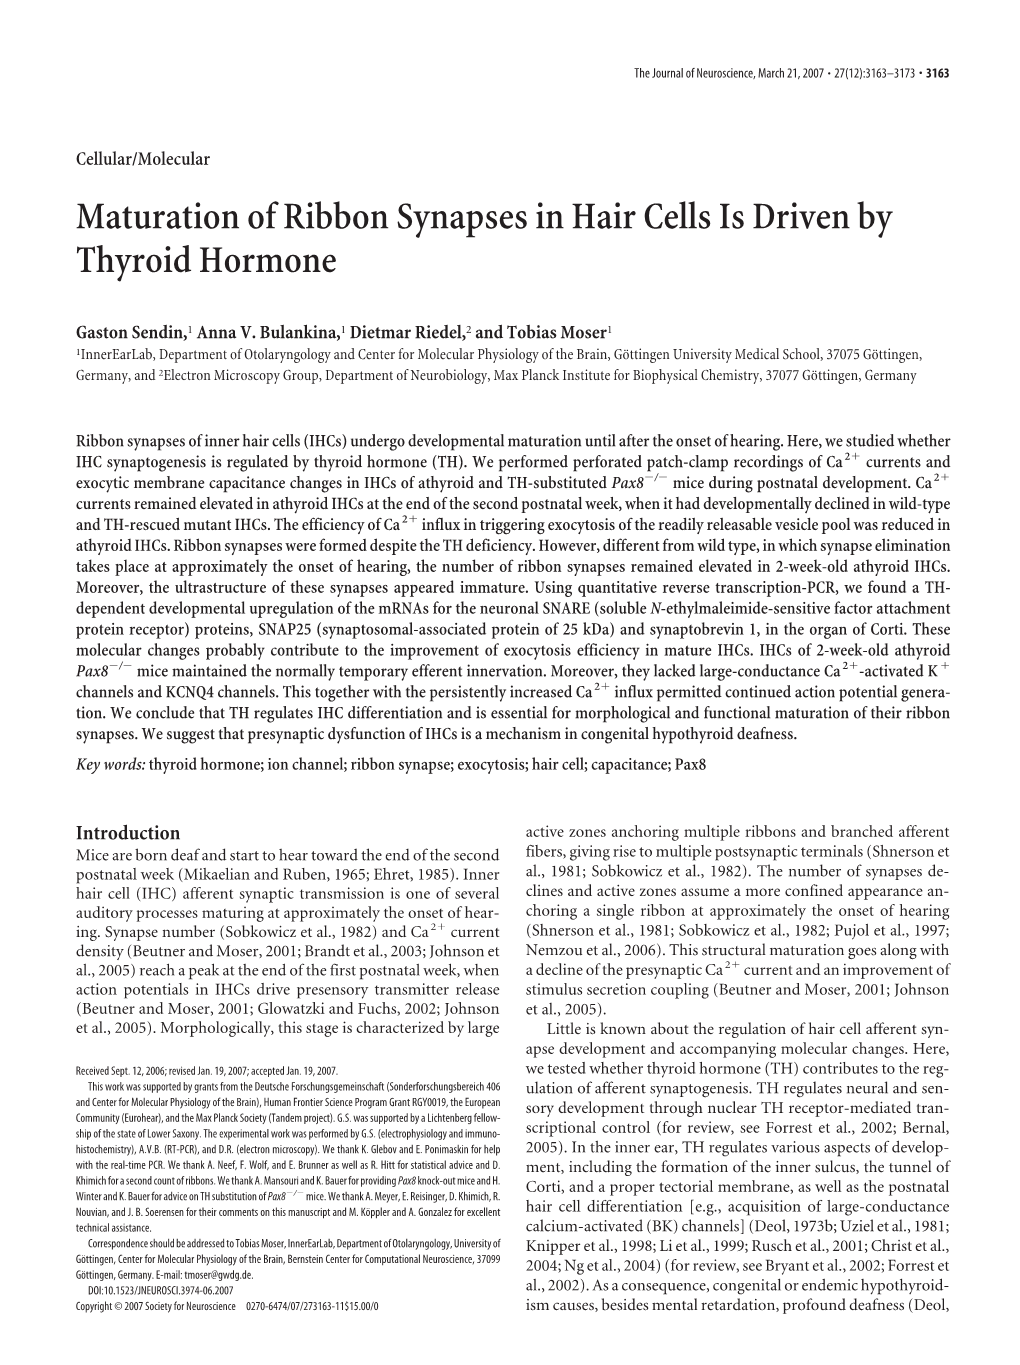 Maturation of Ribbon Synapses in Hair Cells Is Driven by Thyroid Hormone